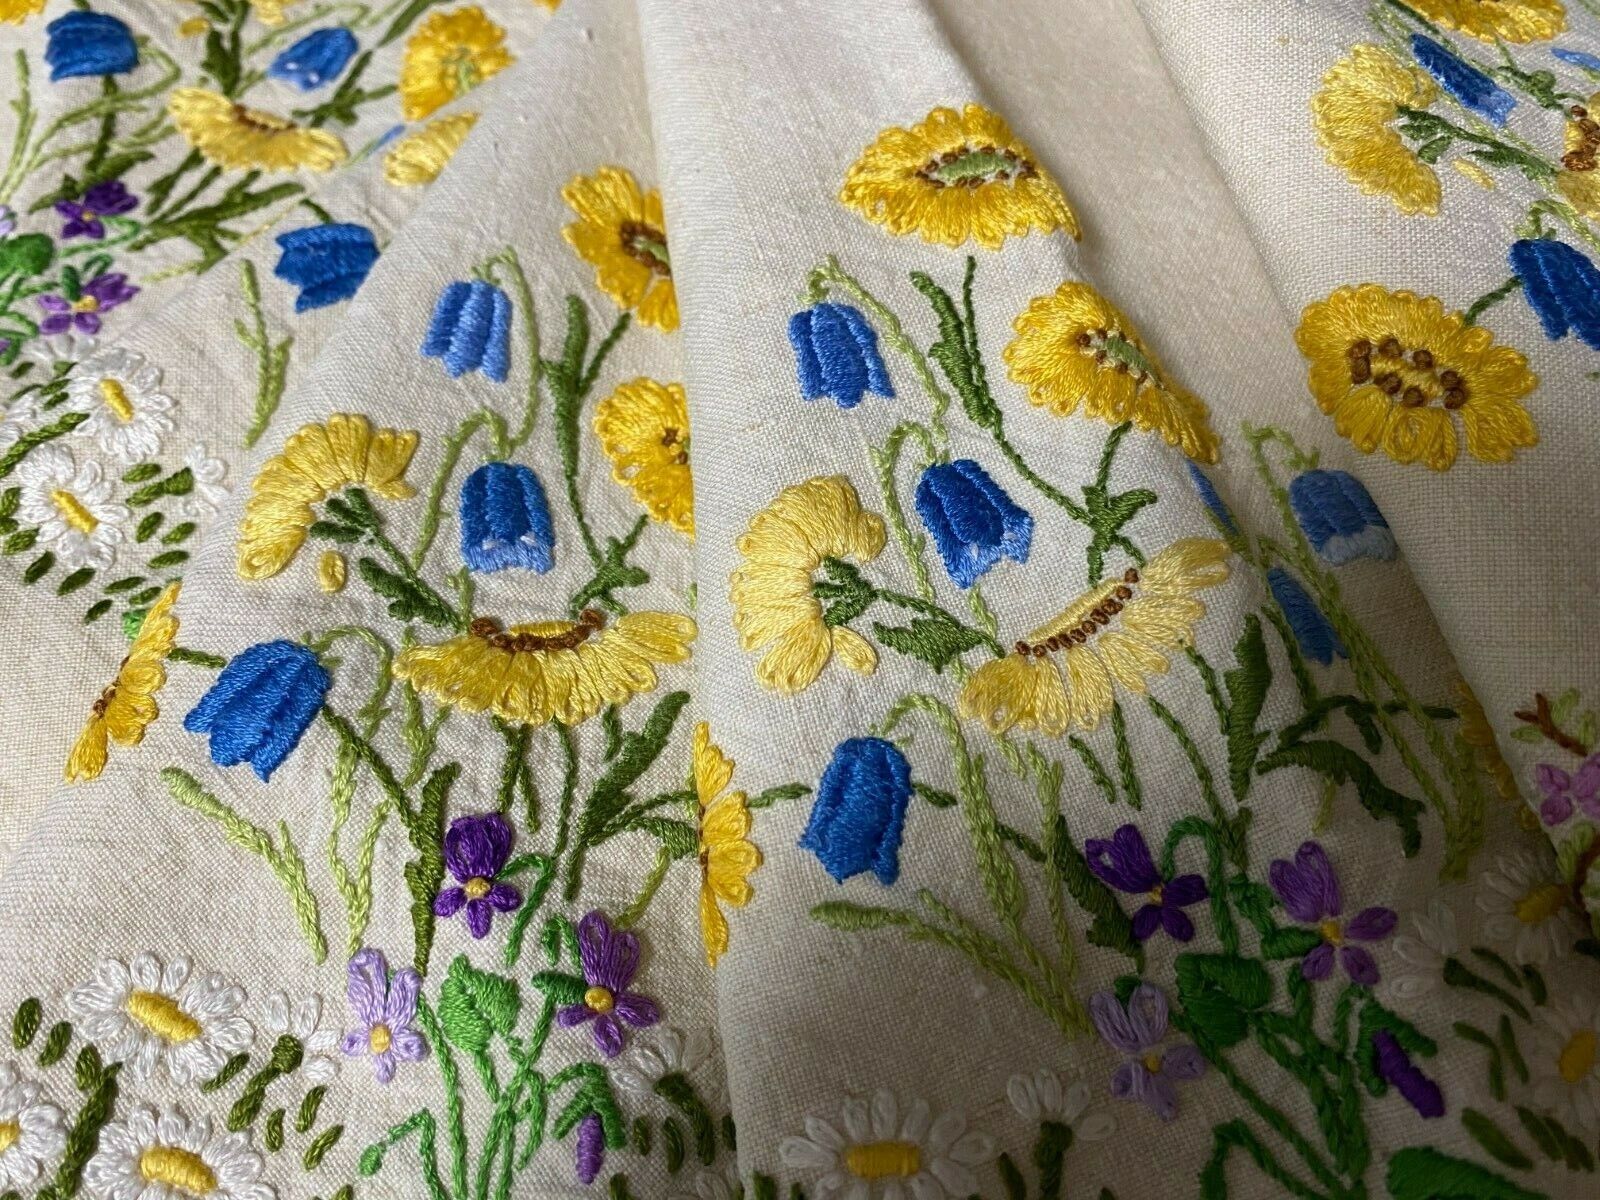 STUNNING \'FAIRISTYTCH\' WILD MEADOW FLOWER CIRCLE HAND EMBROIDERED TABLECLOTH